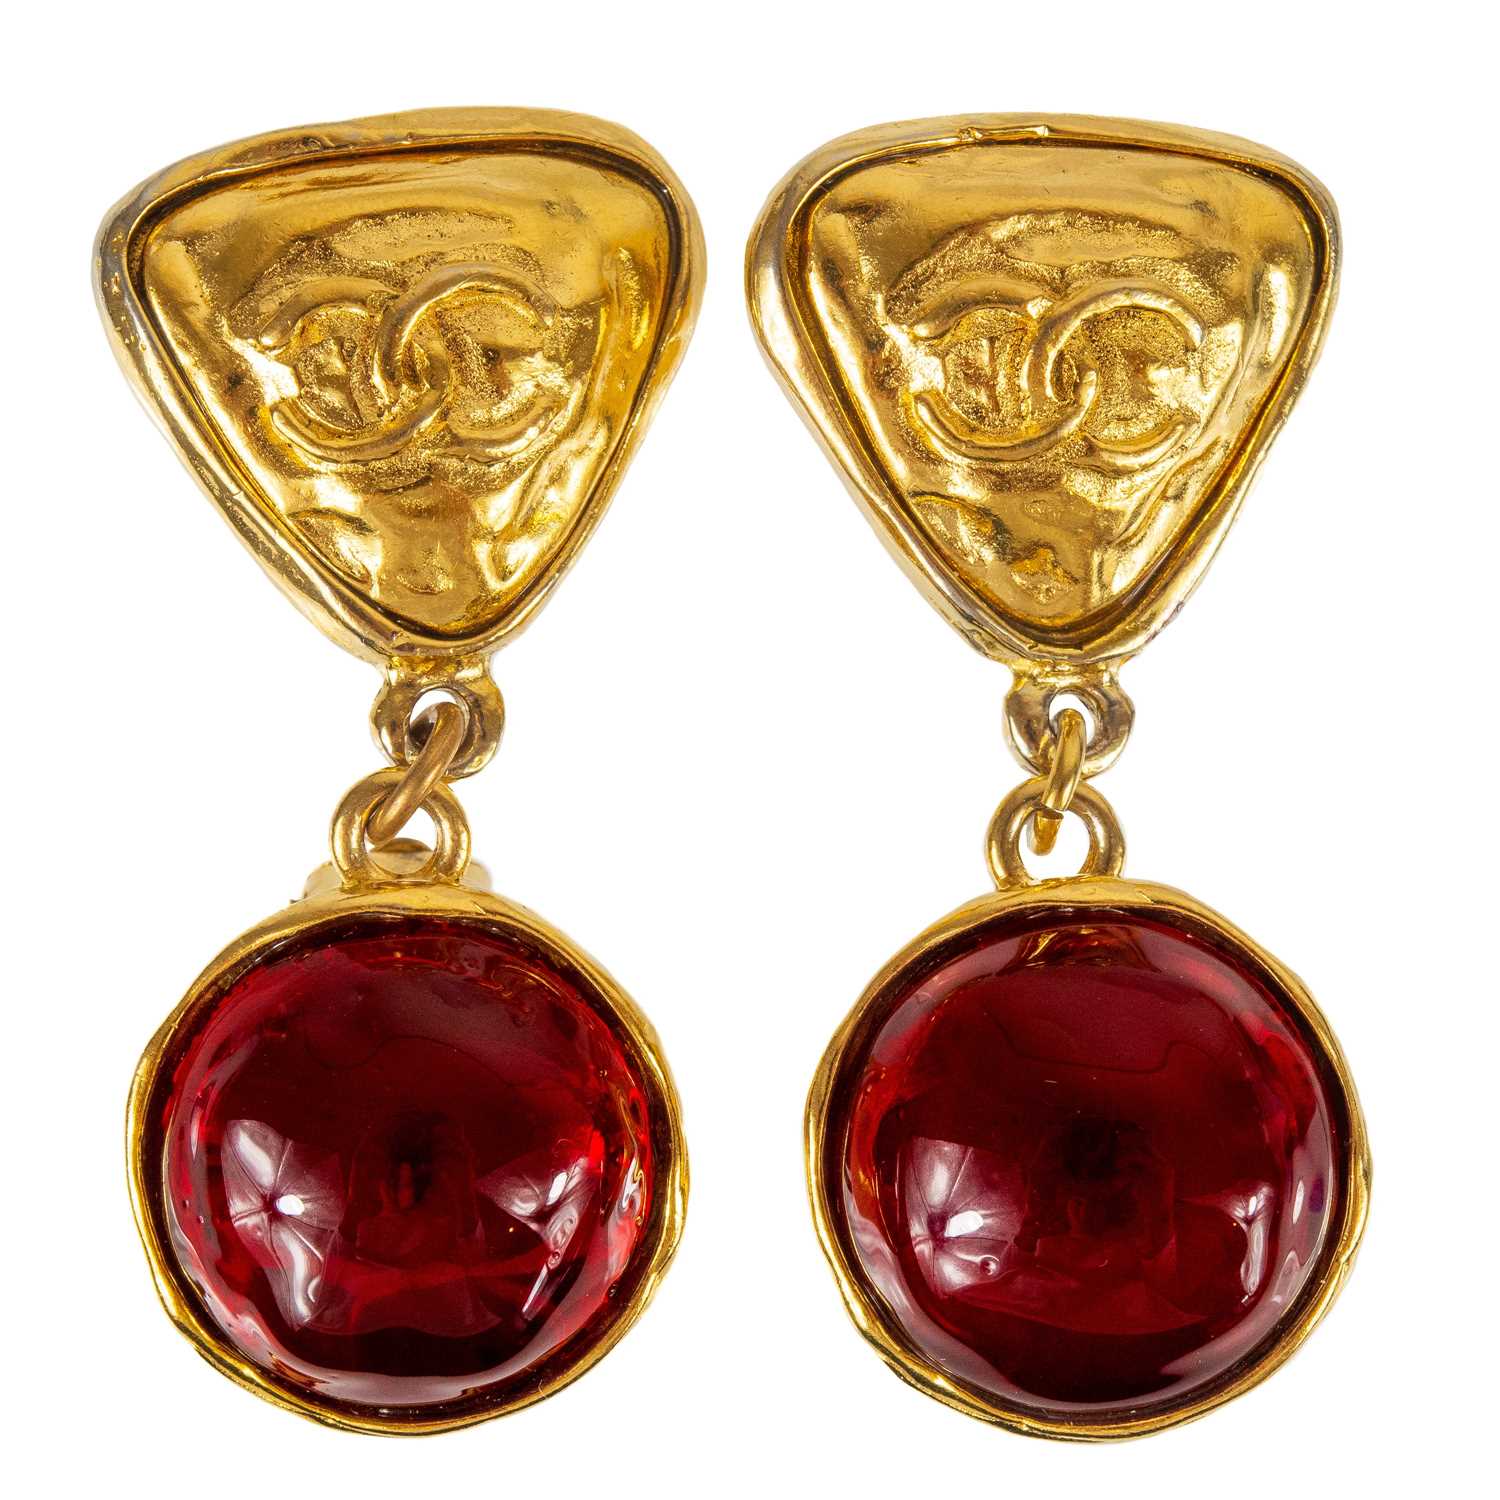 Lot 366 - A pair of Chanel red Gripoix clip earrings.